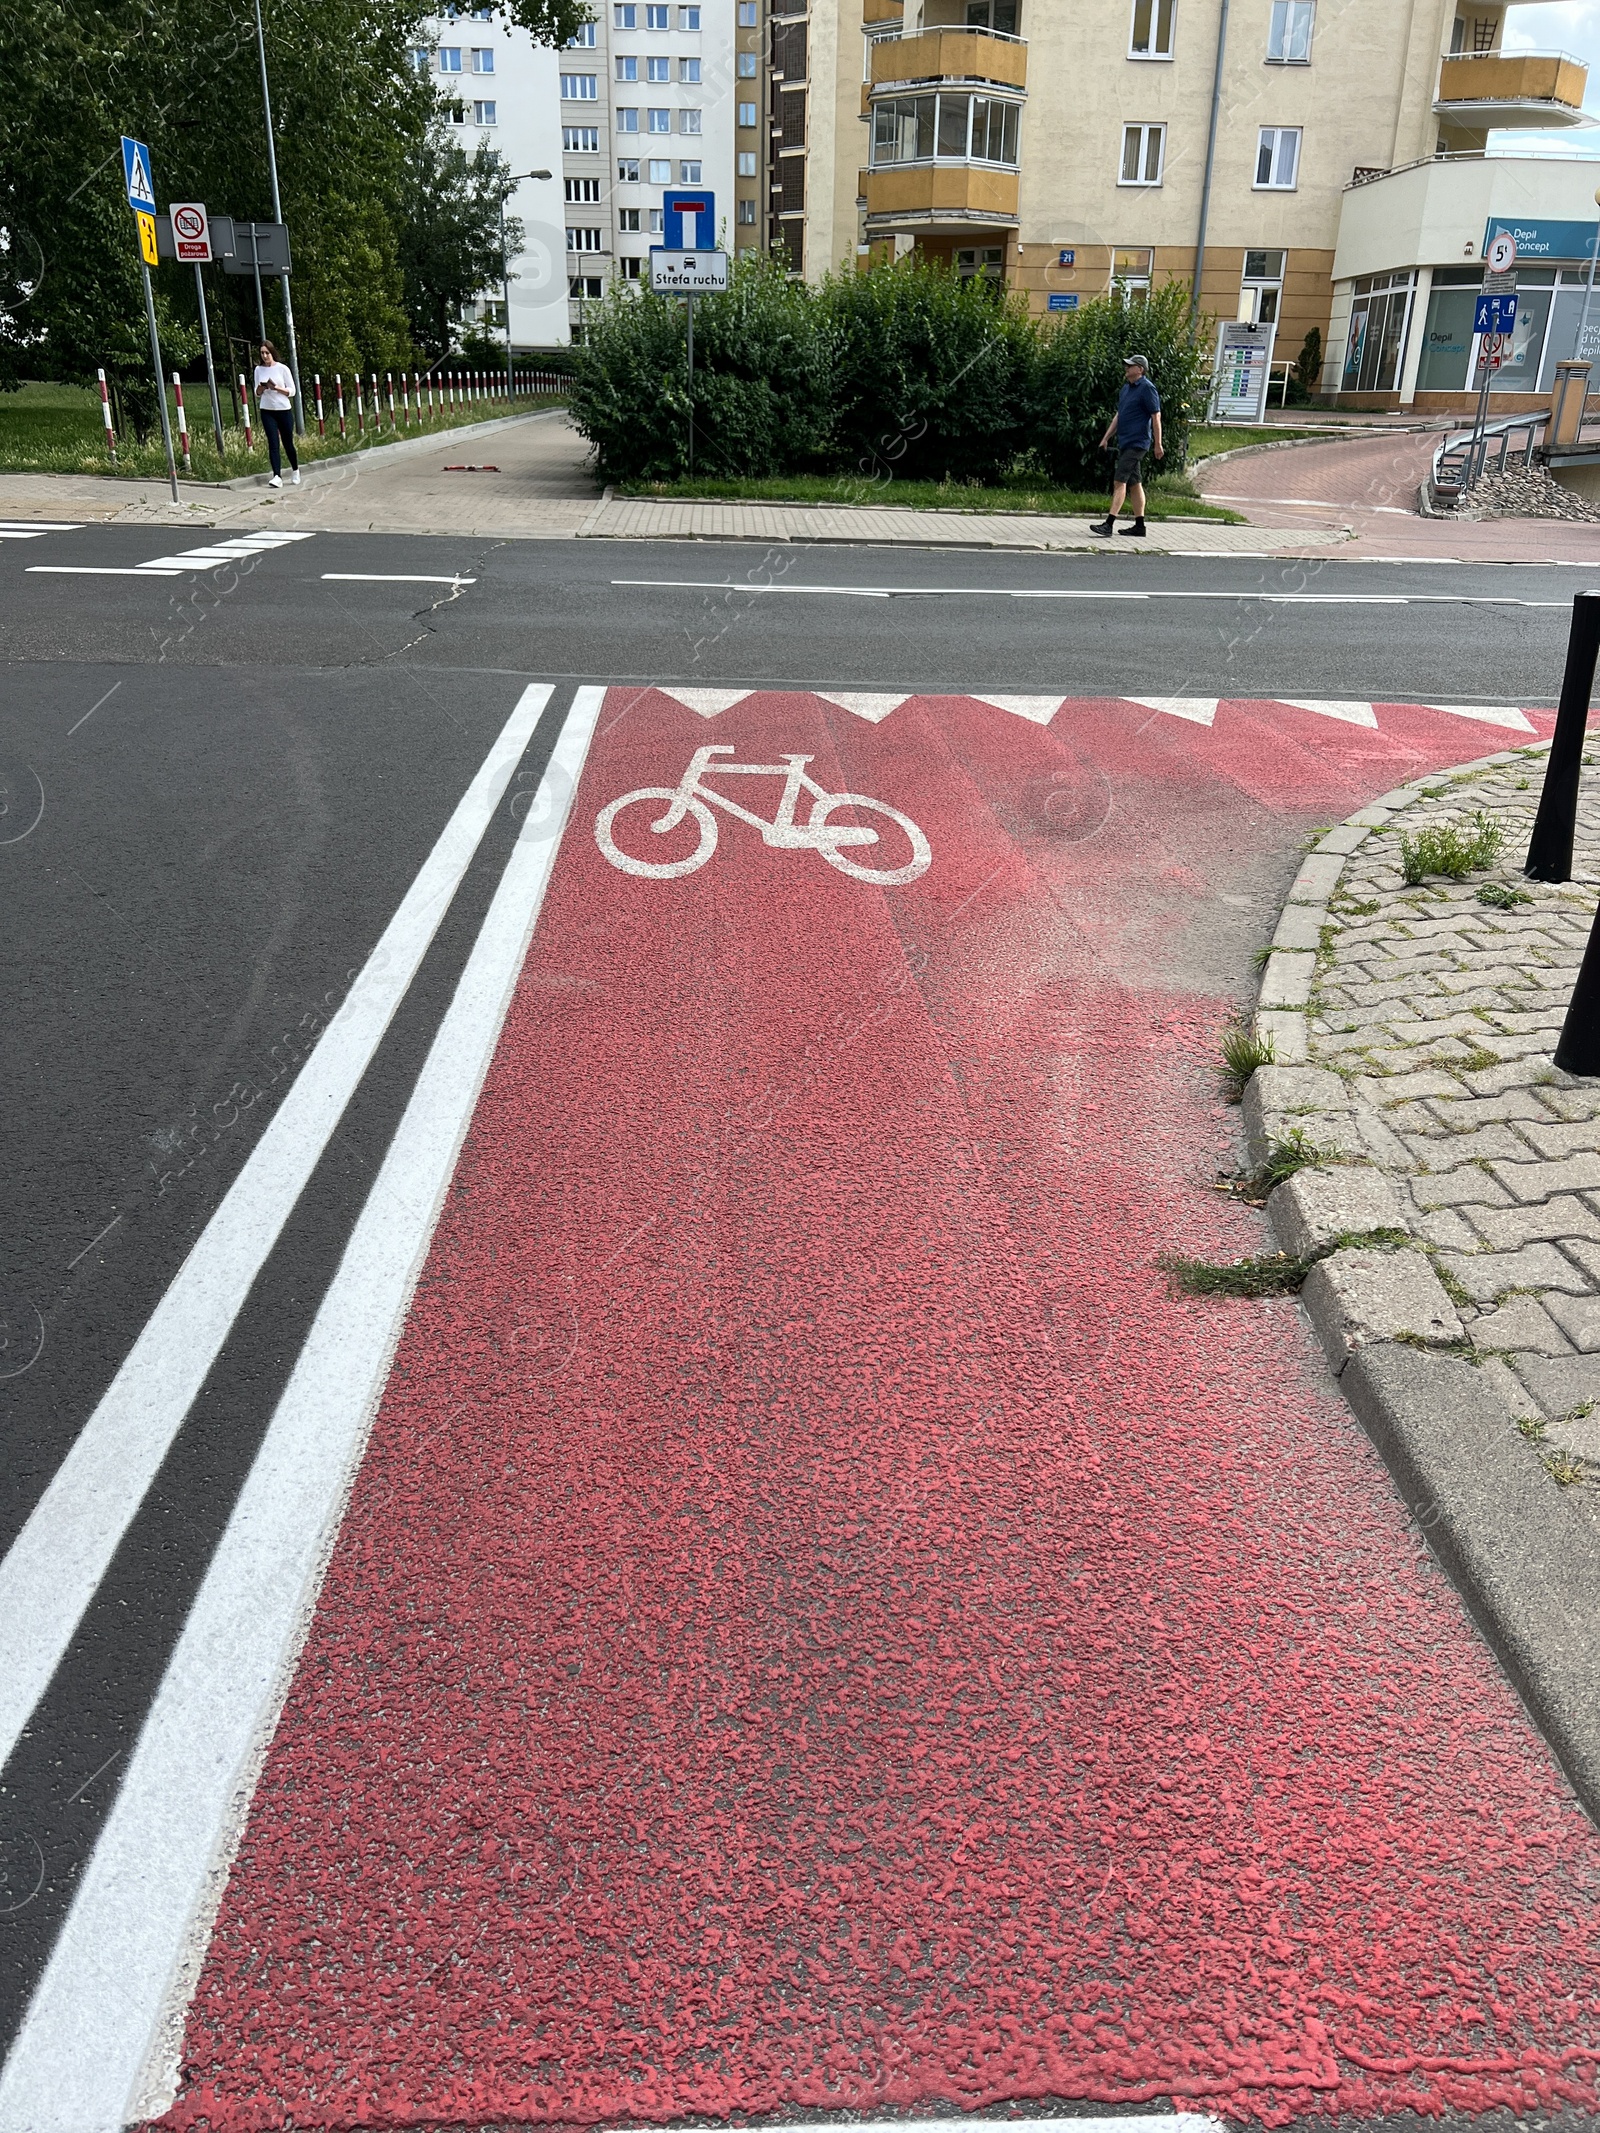 Photo of Warsaw, Poland - July 18, 2022: Red bicycle lane with white sign painted on asphalt in city